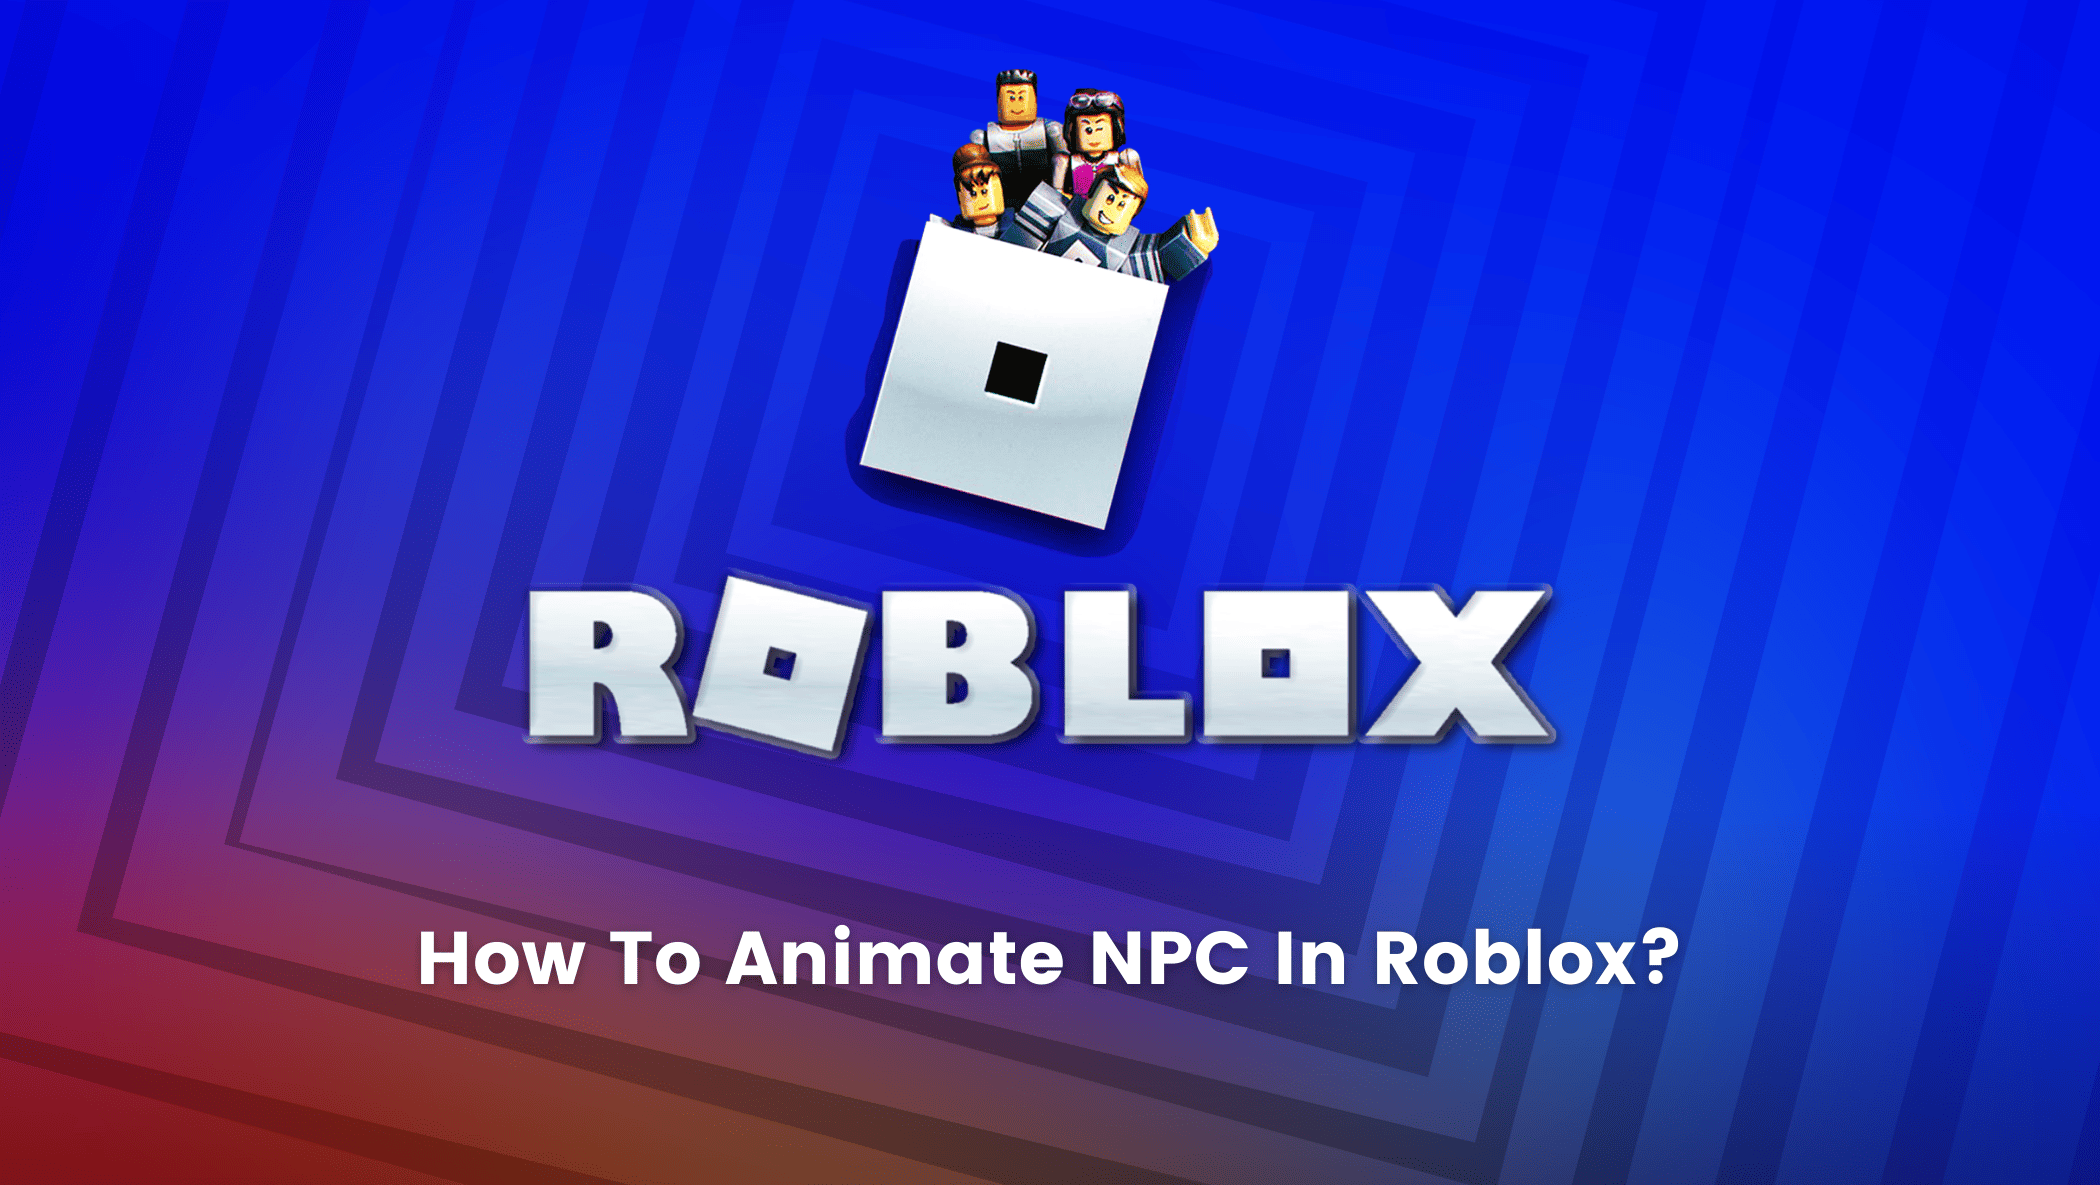 How To Animate NPC In Roblox